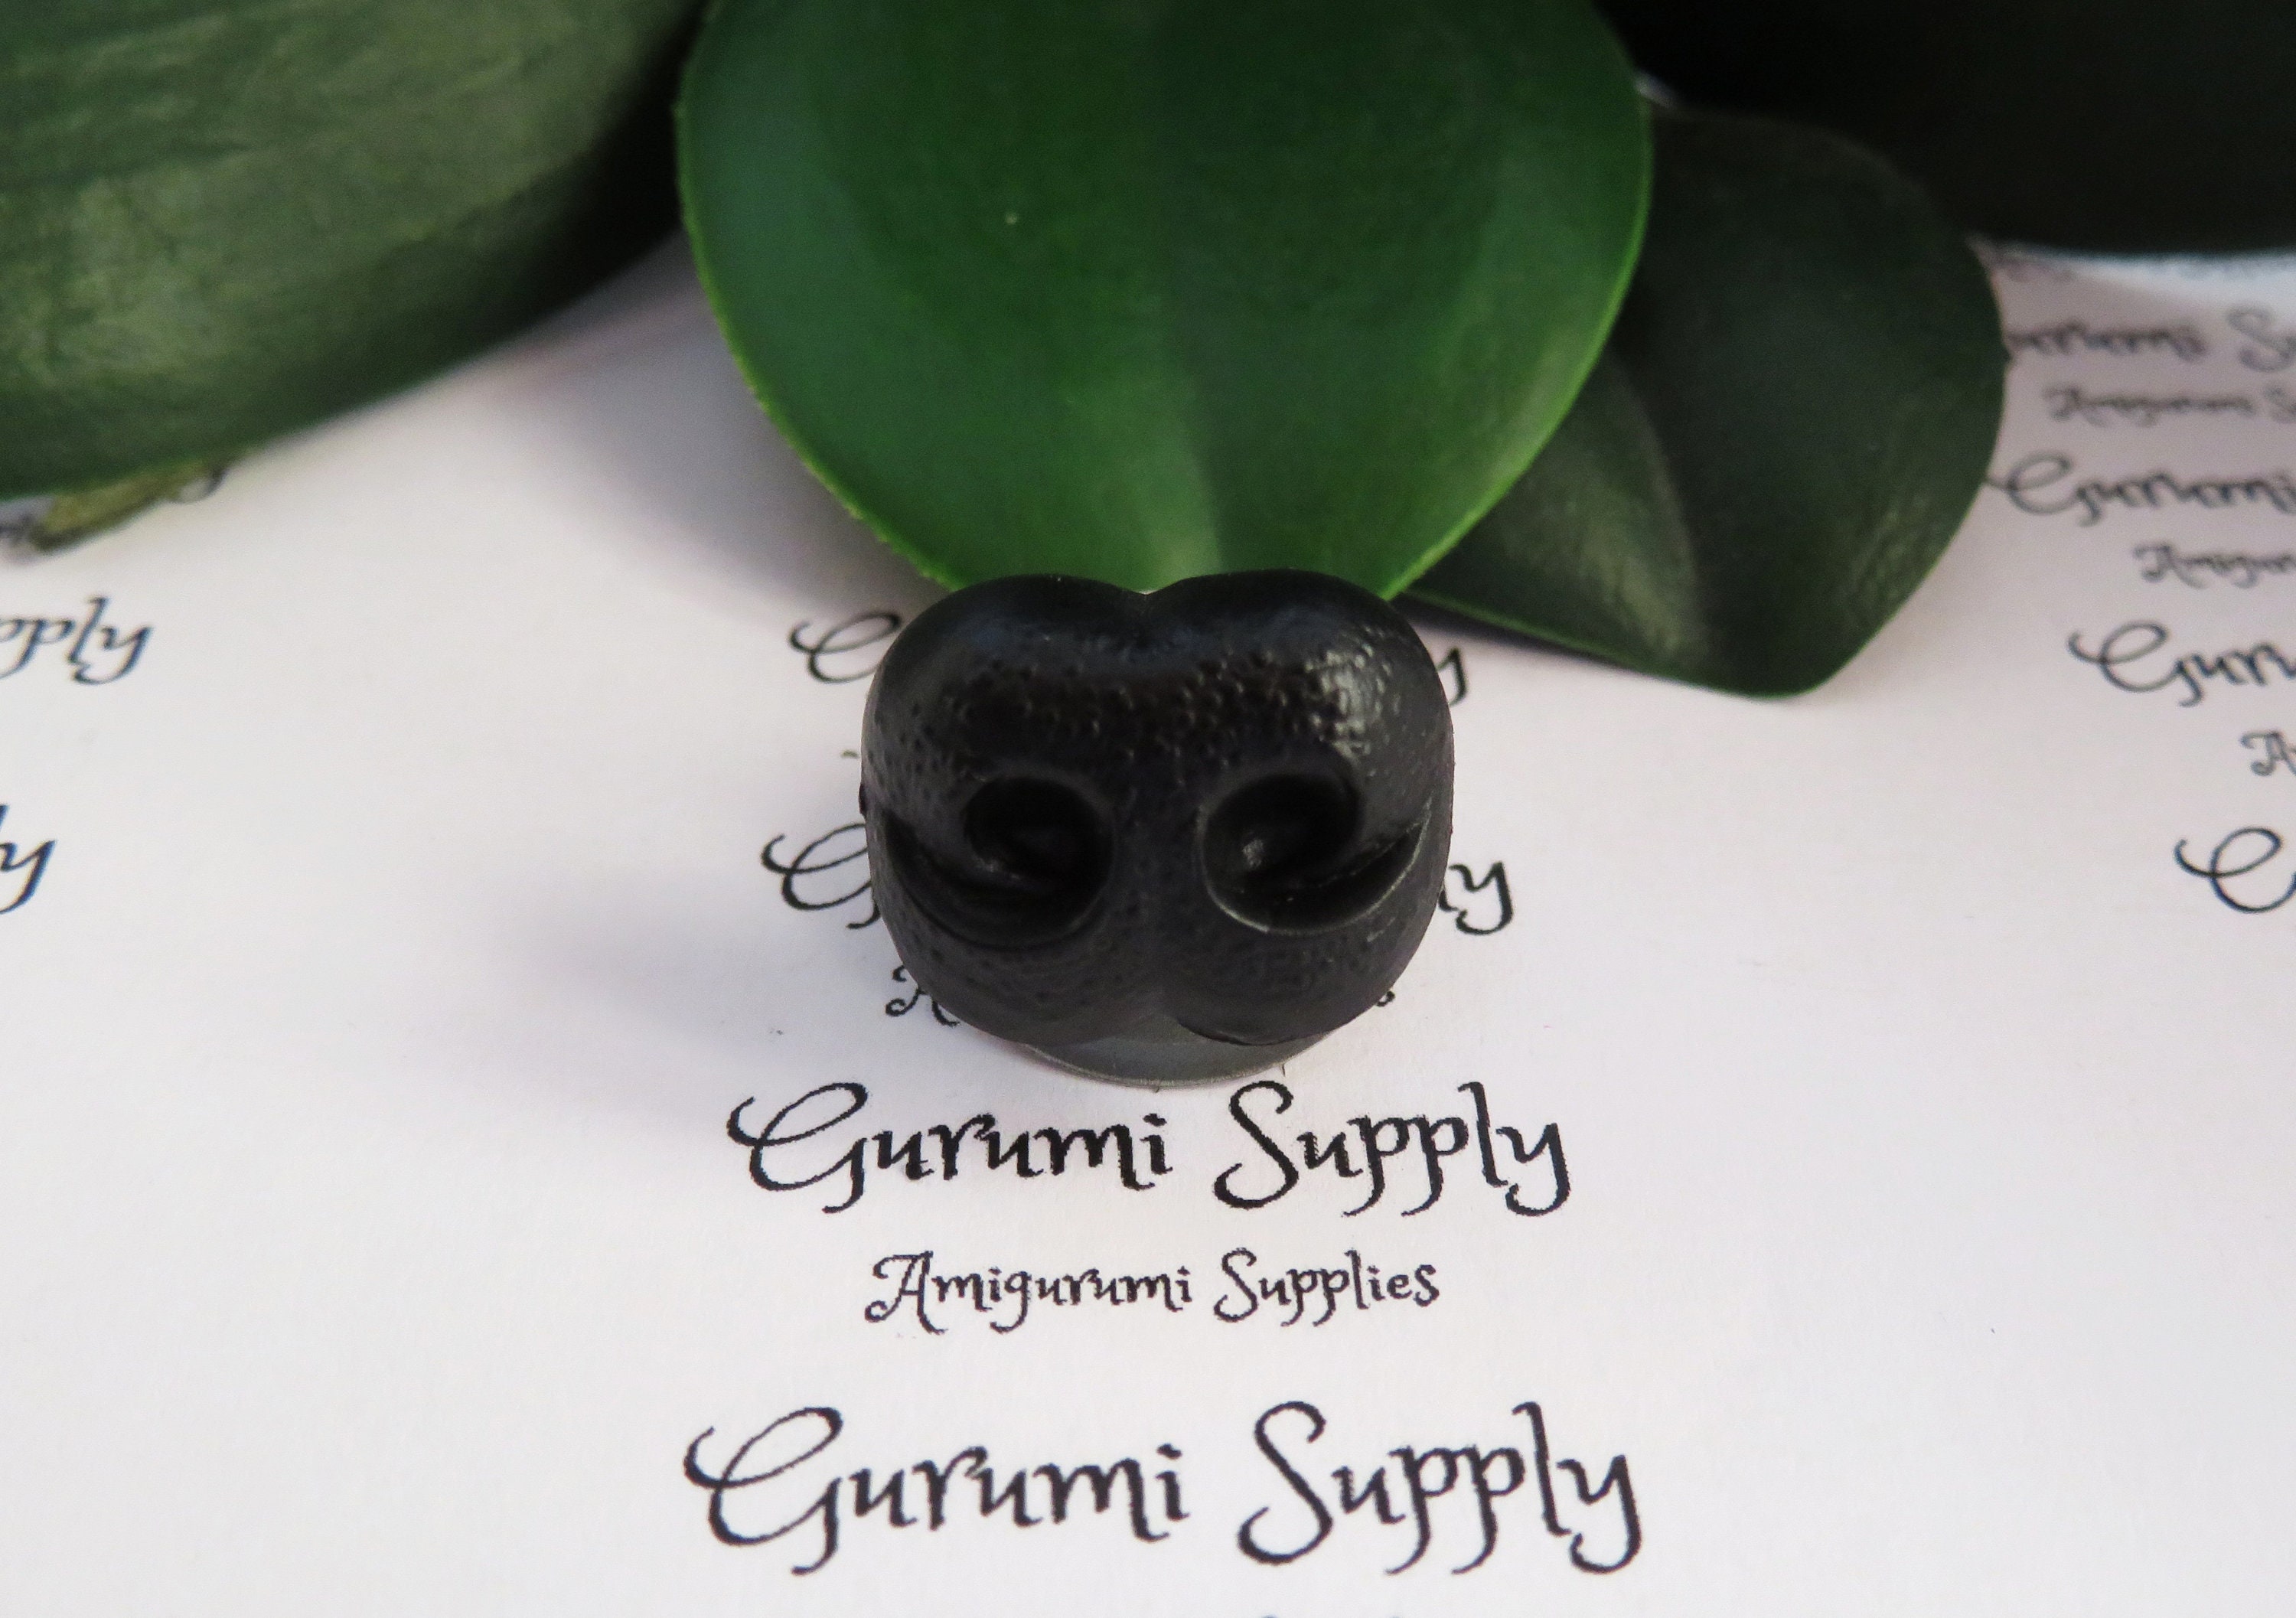 Limited Quantity! 18mmSolid Black Safety Noses with Metal Washer - 2 ct -  Amigurumi / Dogs / Bears / Creations / Animal / Toys / Crochet